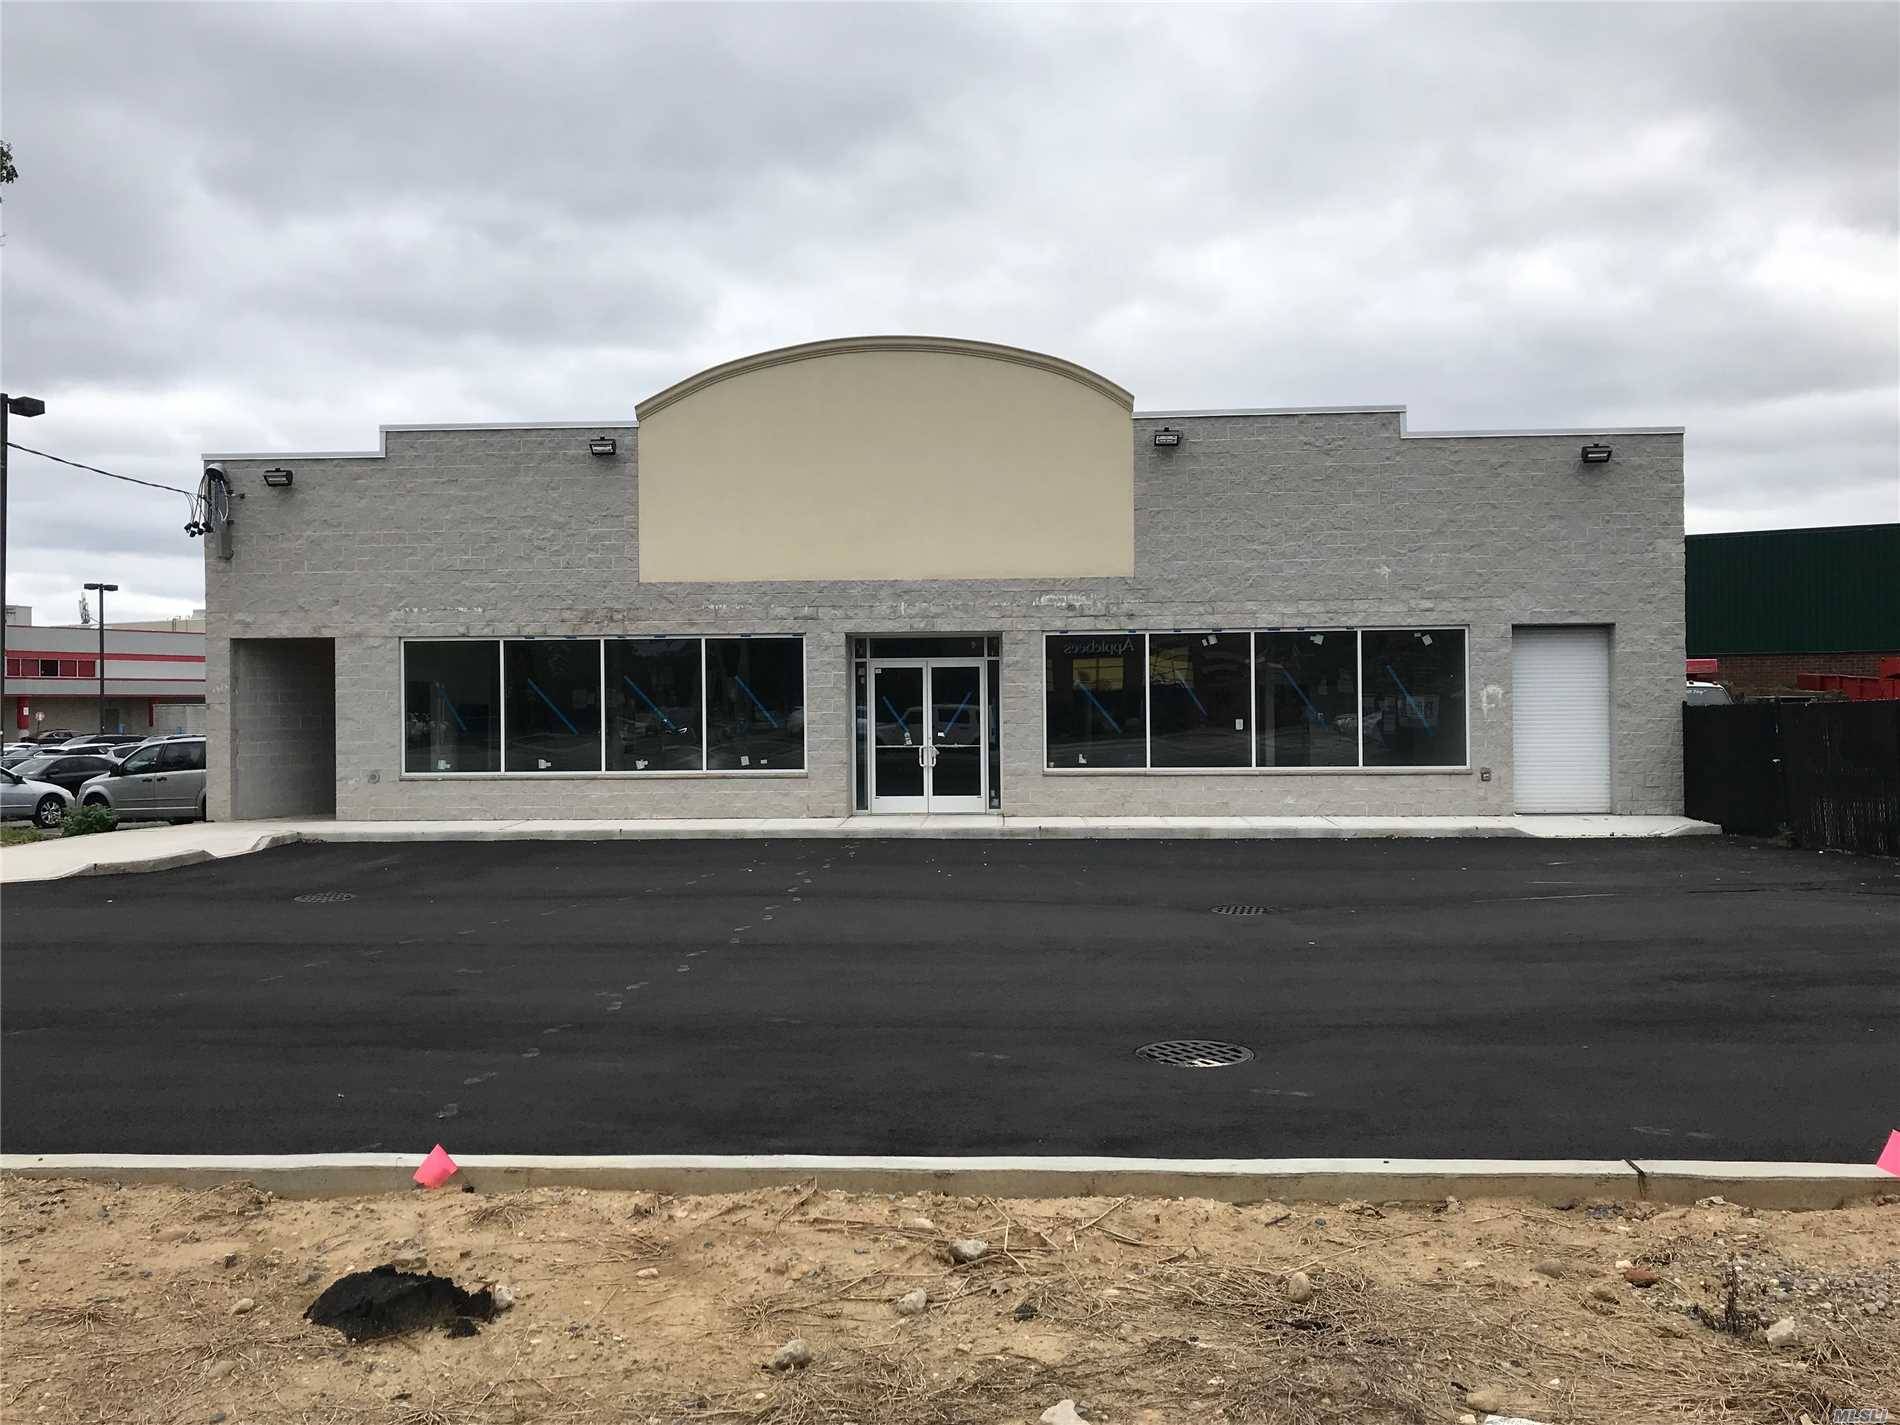 Brand New Retail Building 12-Foot Ceiling, With 3000 Sqft + 2500 Sqft Basement, On The Busy Street And Corner Lot, 9 Parking Spaces With Loading Dock.